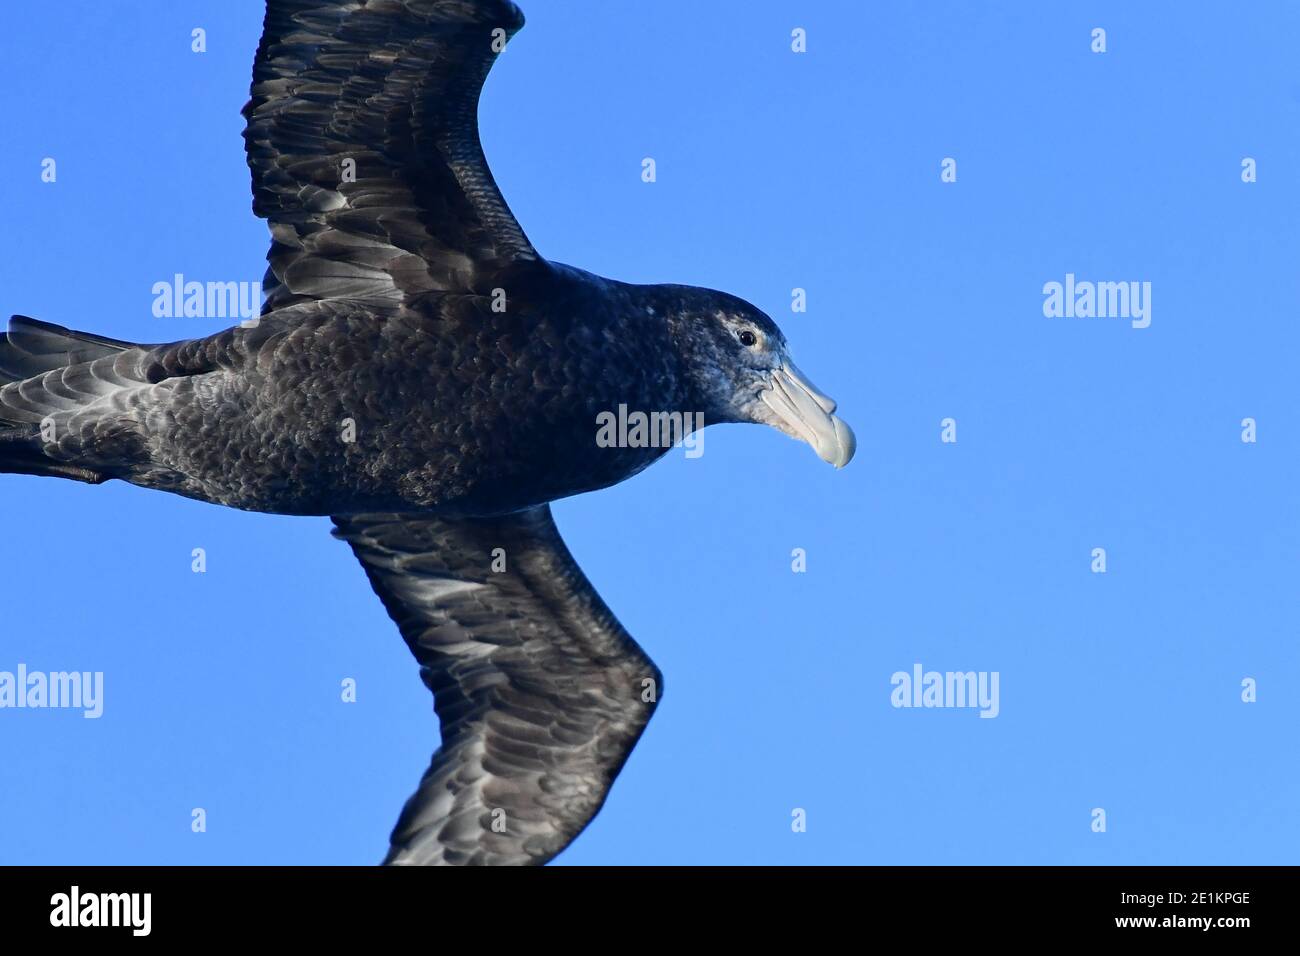 Giant petrel seabird, soars with the wind currents of the South Atlantic Ocean in the Southern Hemisphere. Stock Photo